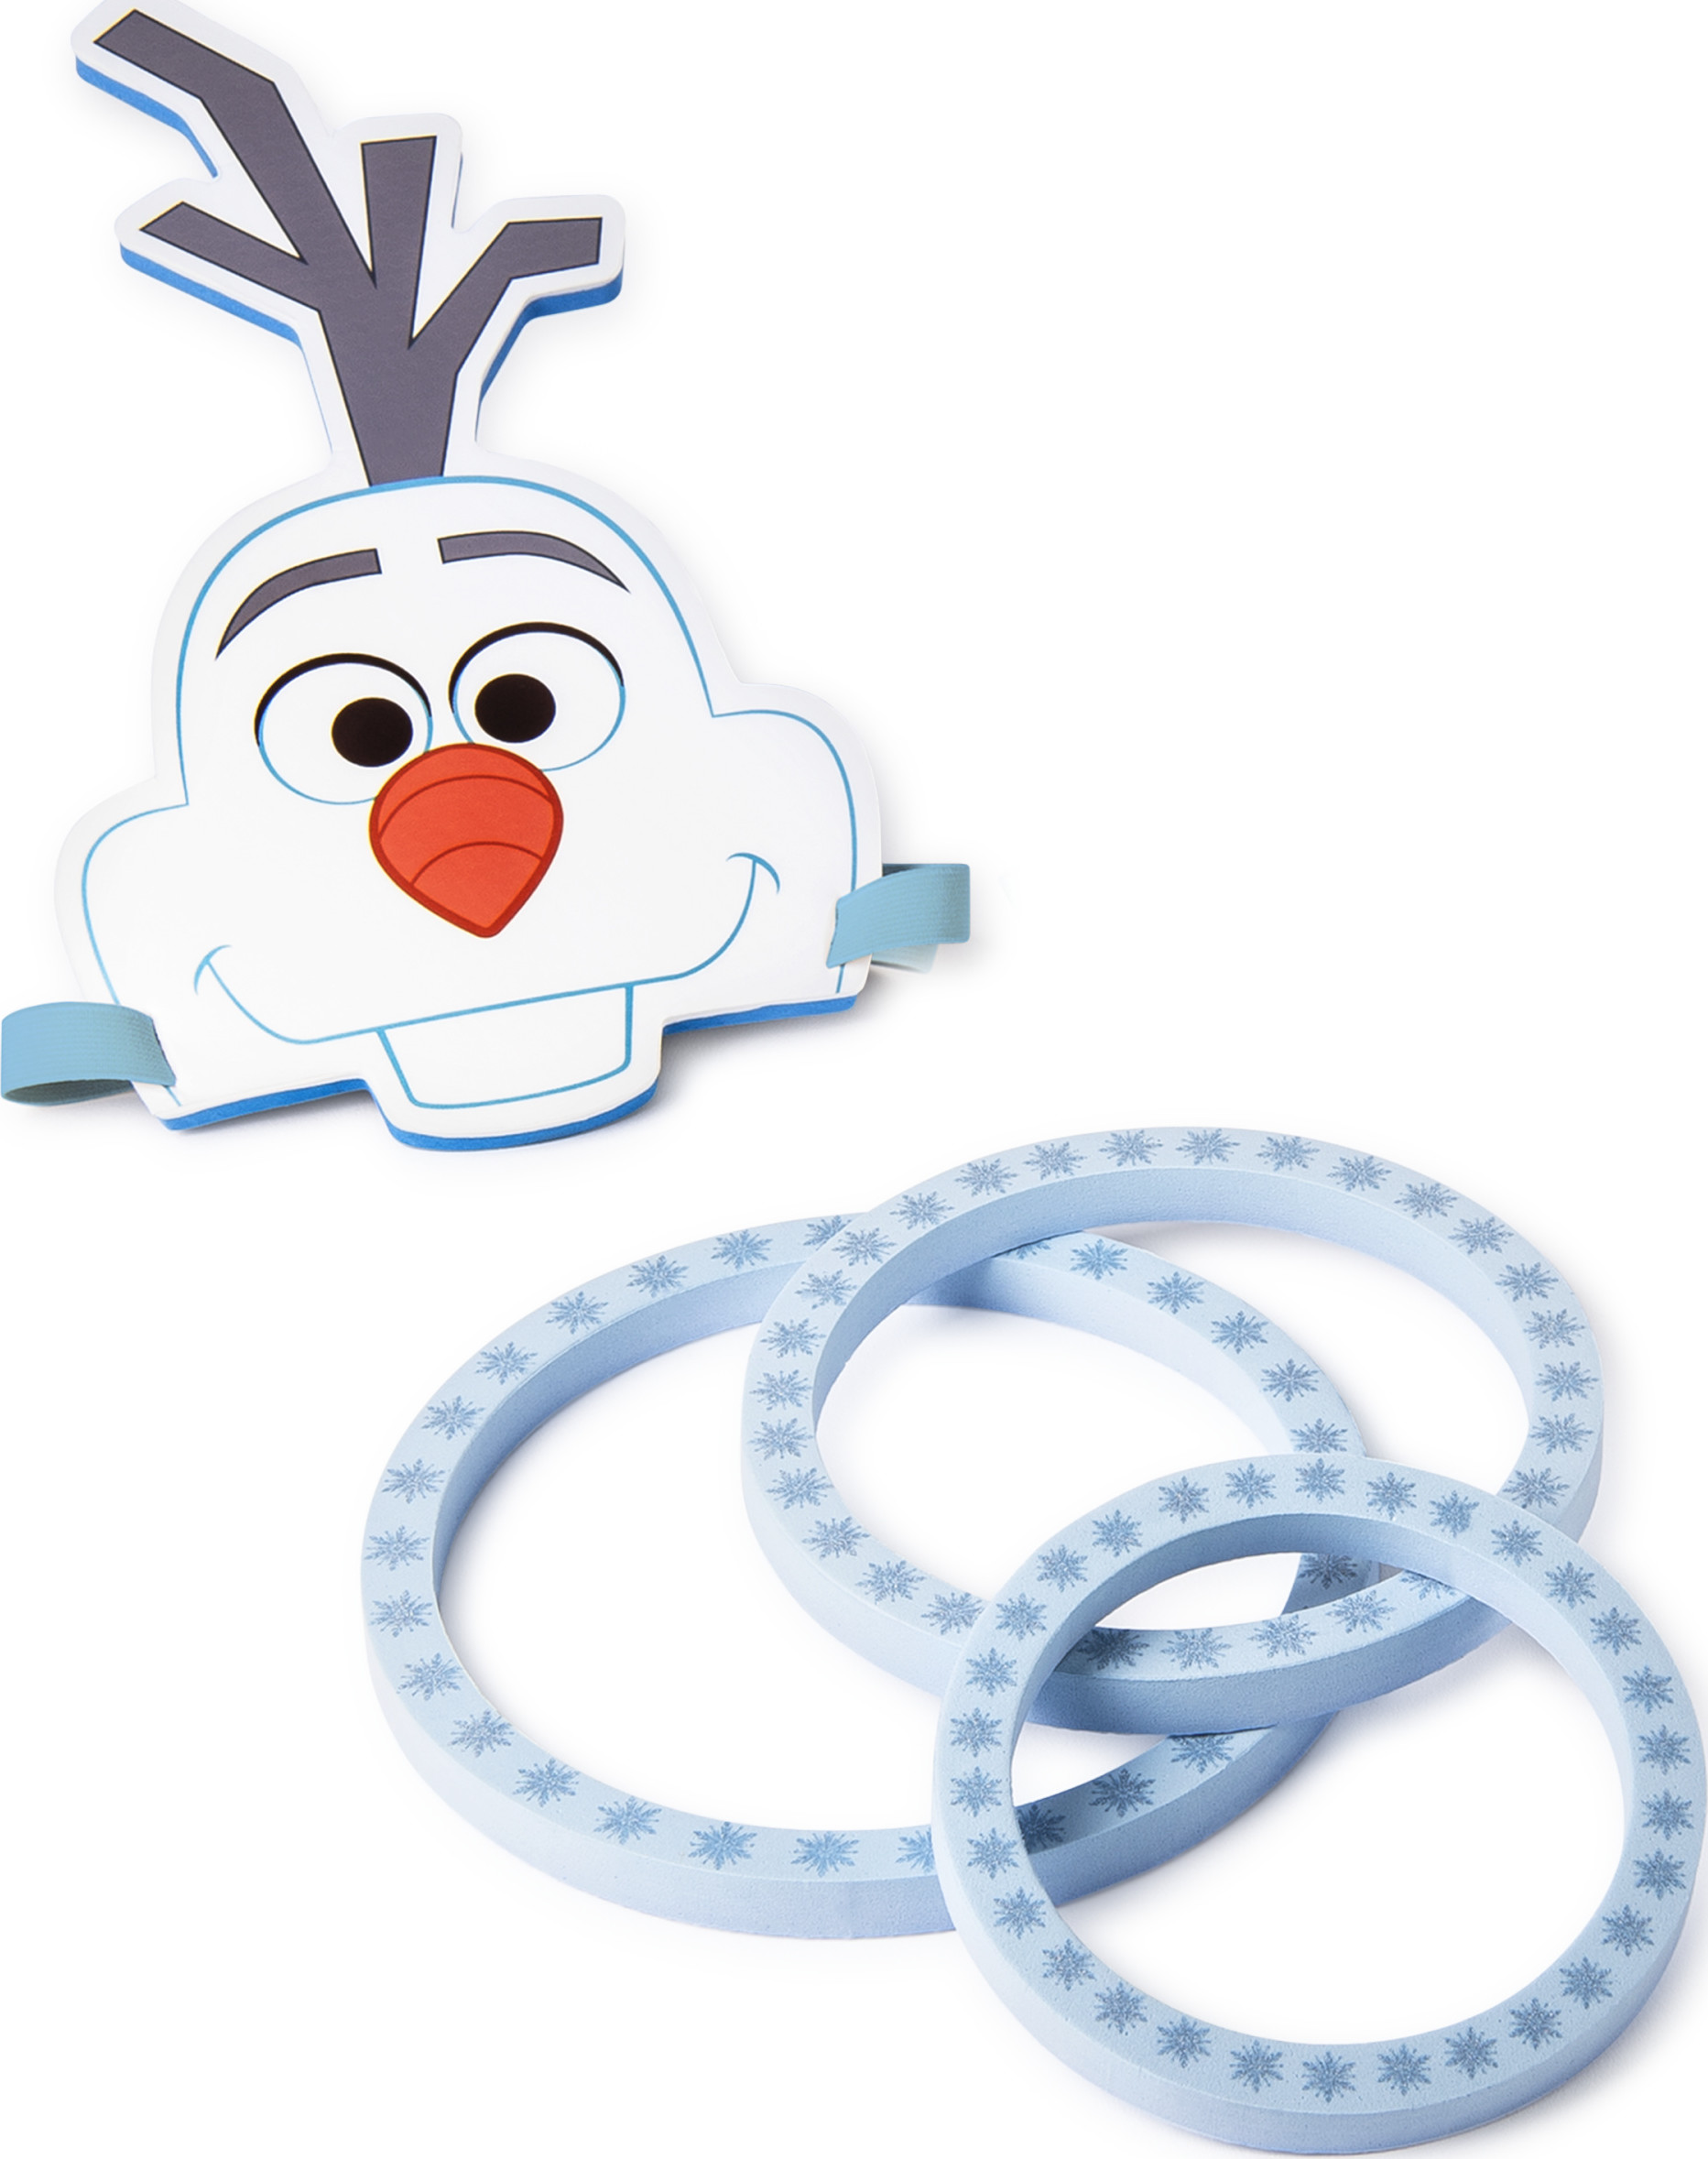 Disney Frozen 2 Up and Active Olaf Snowflake Catch Game for Kids and Families - image 4 of 4